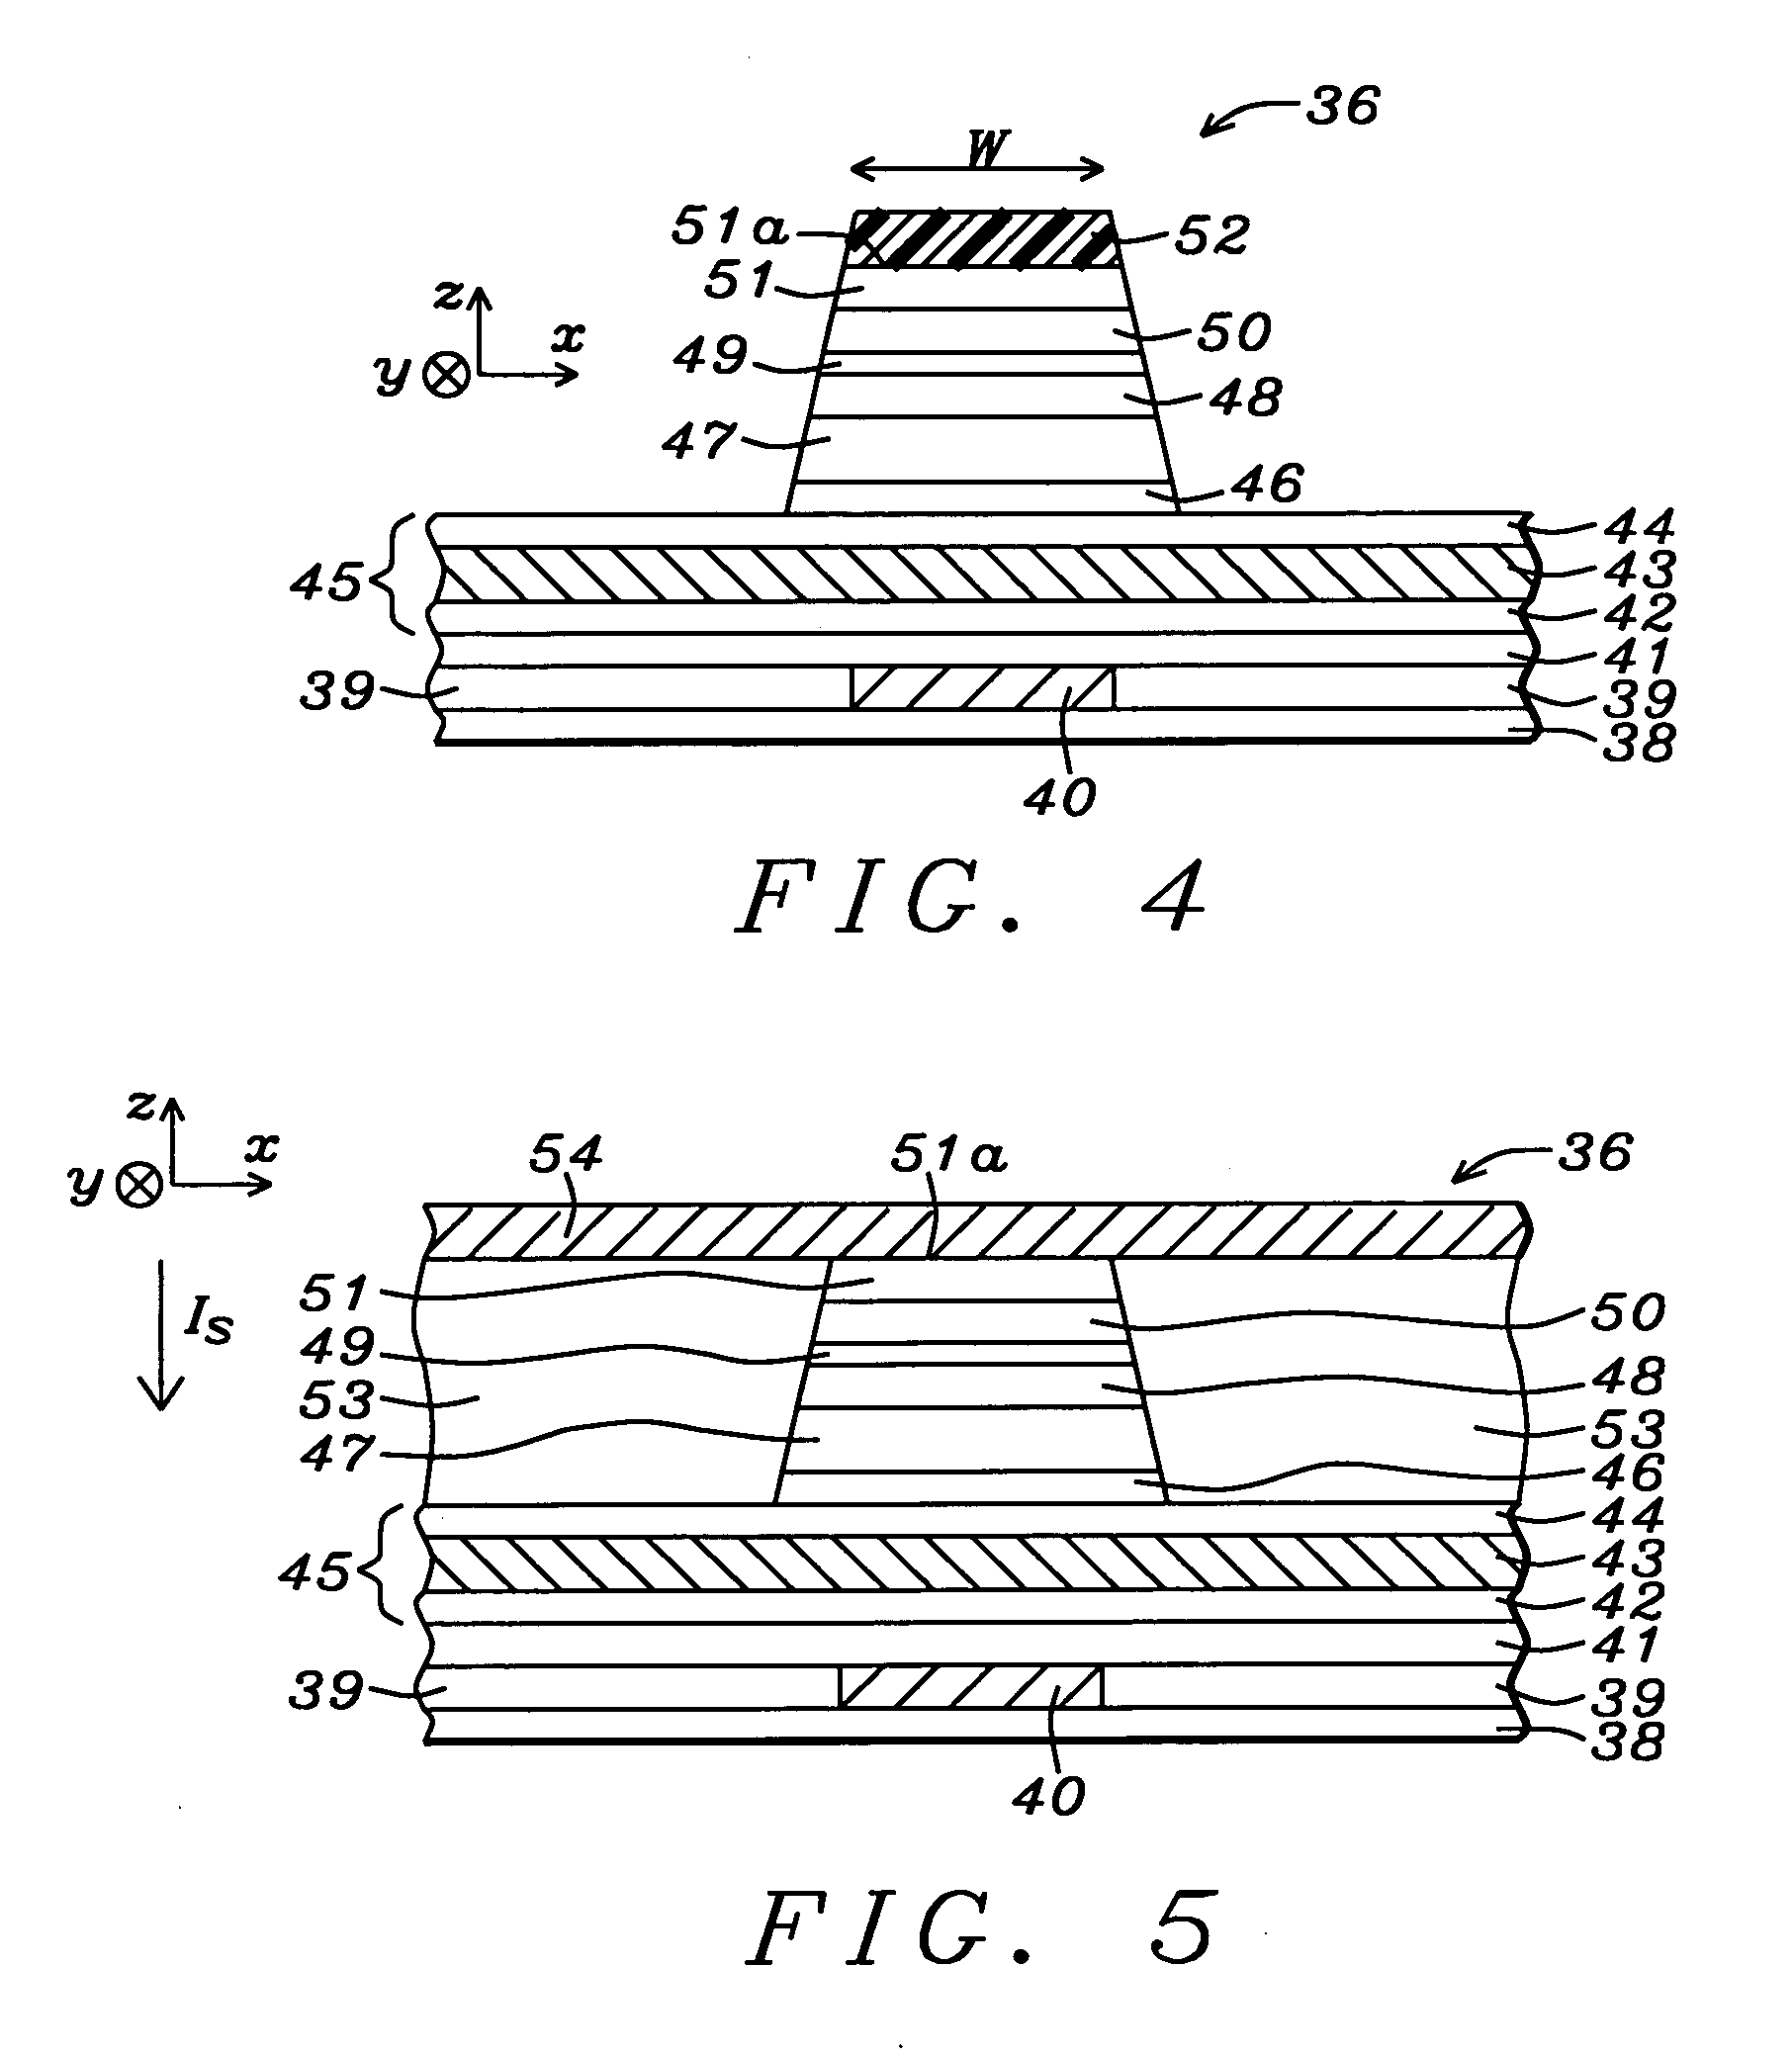 Novel capping structure for enhancing dR/R of the MTJ device